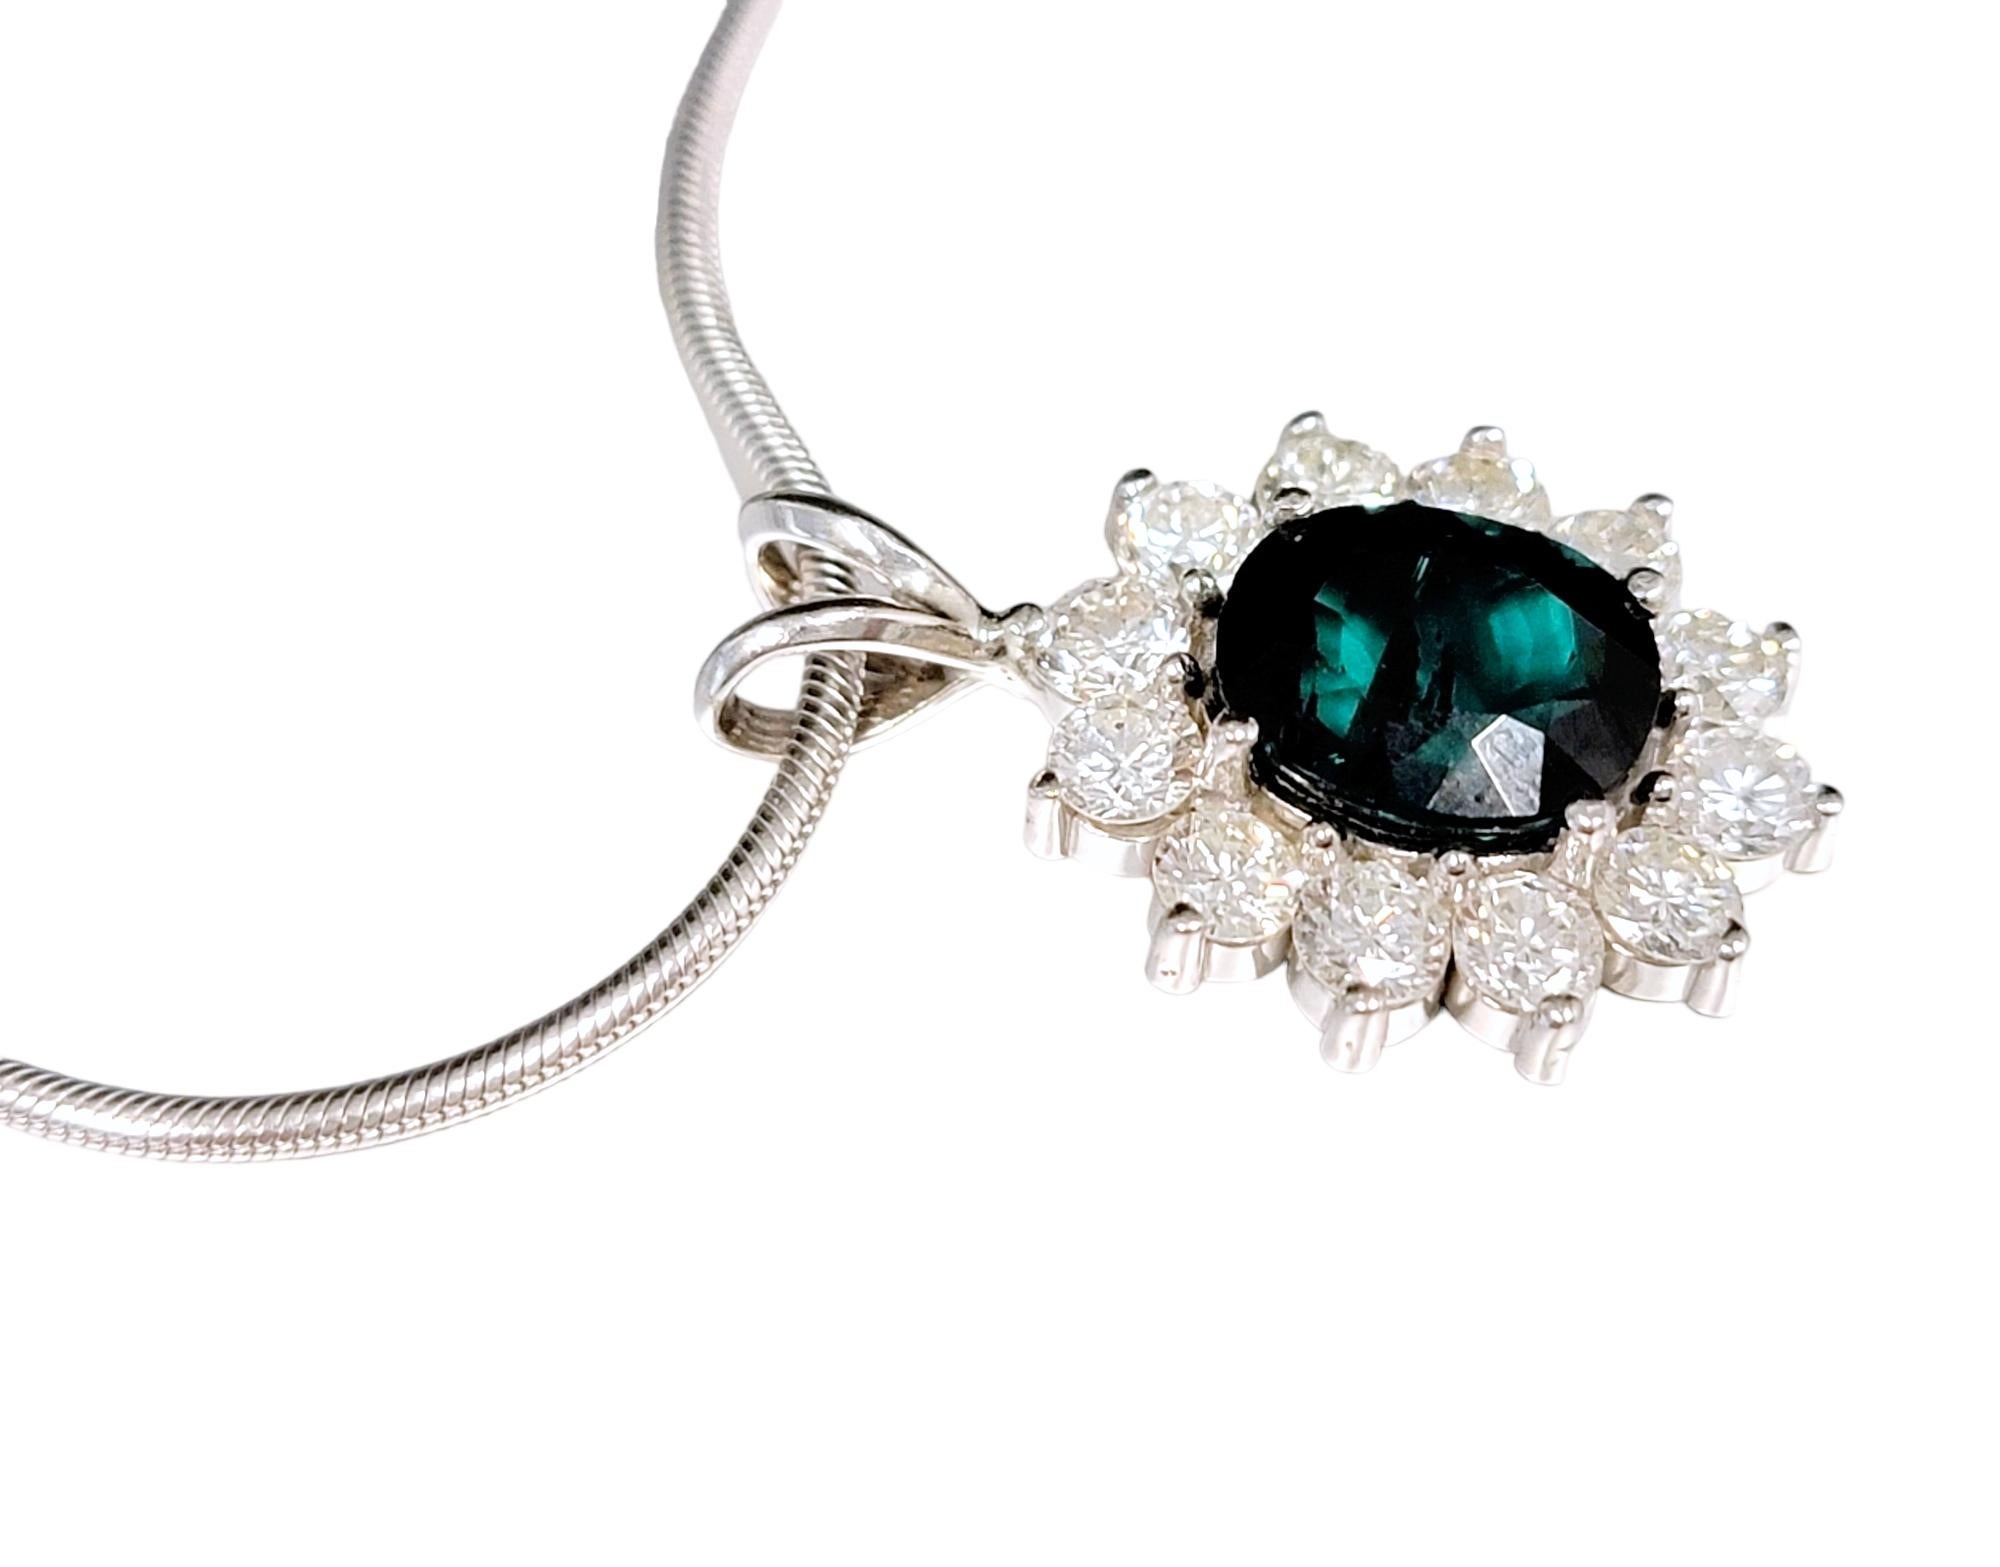 Absolutely gorgeous tourmaline and diamond halo pendant necklace, gracefully suspended from a delicate white gold snake chain. This exquisite piece is a true embodiment of elegance and sophistication, making it an ideal piece to add to your fine